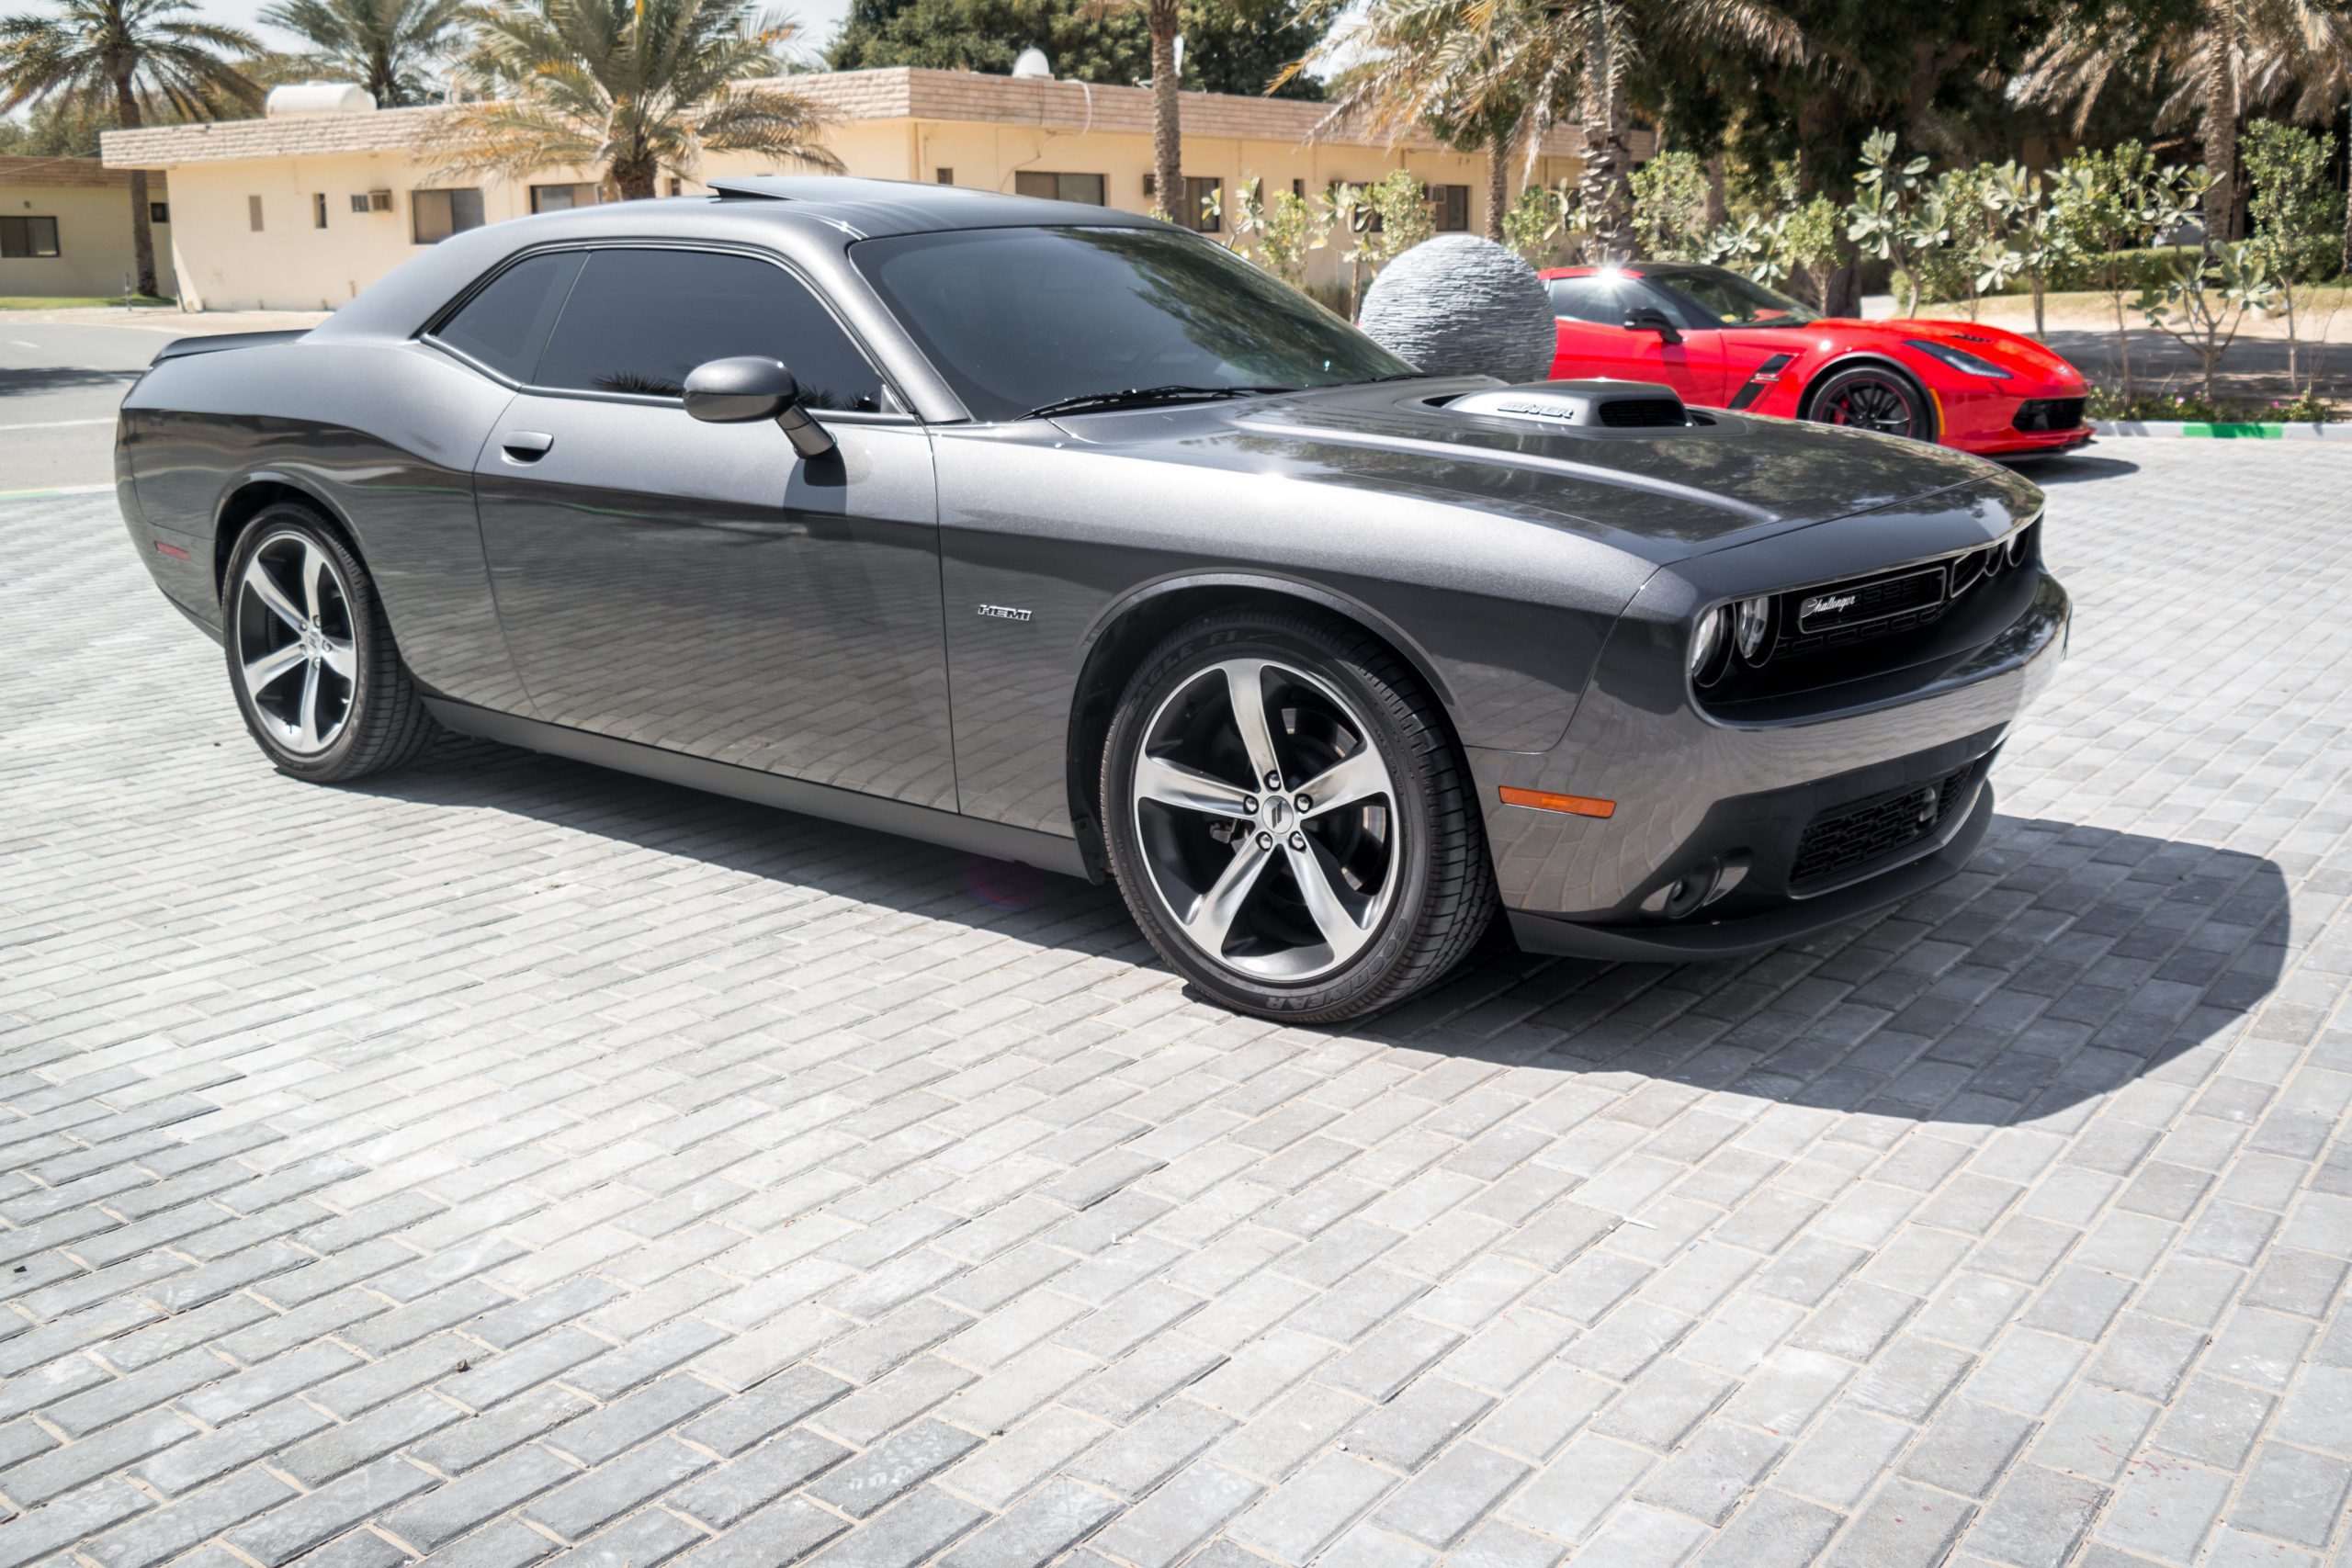 Class action alleges Dodge Chargers have a gear train defect